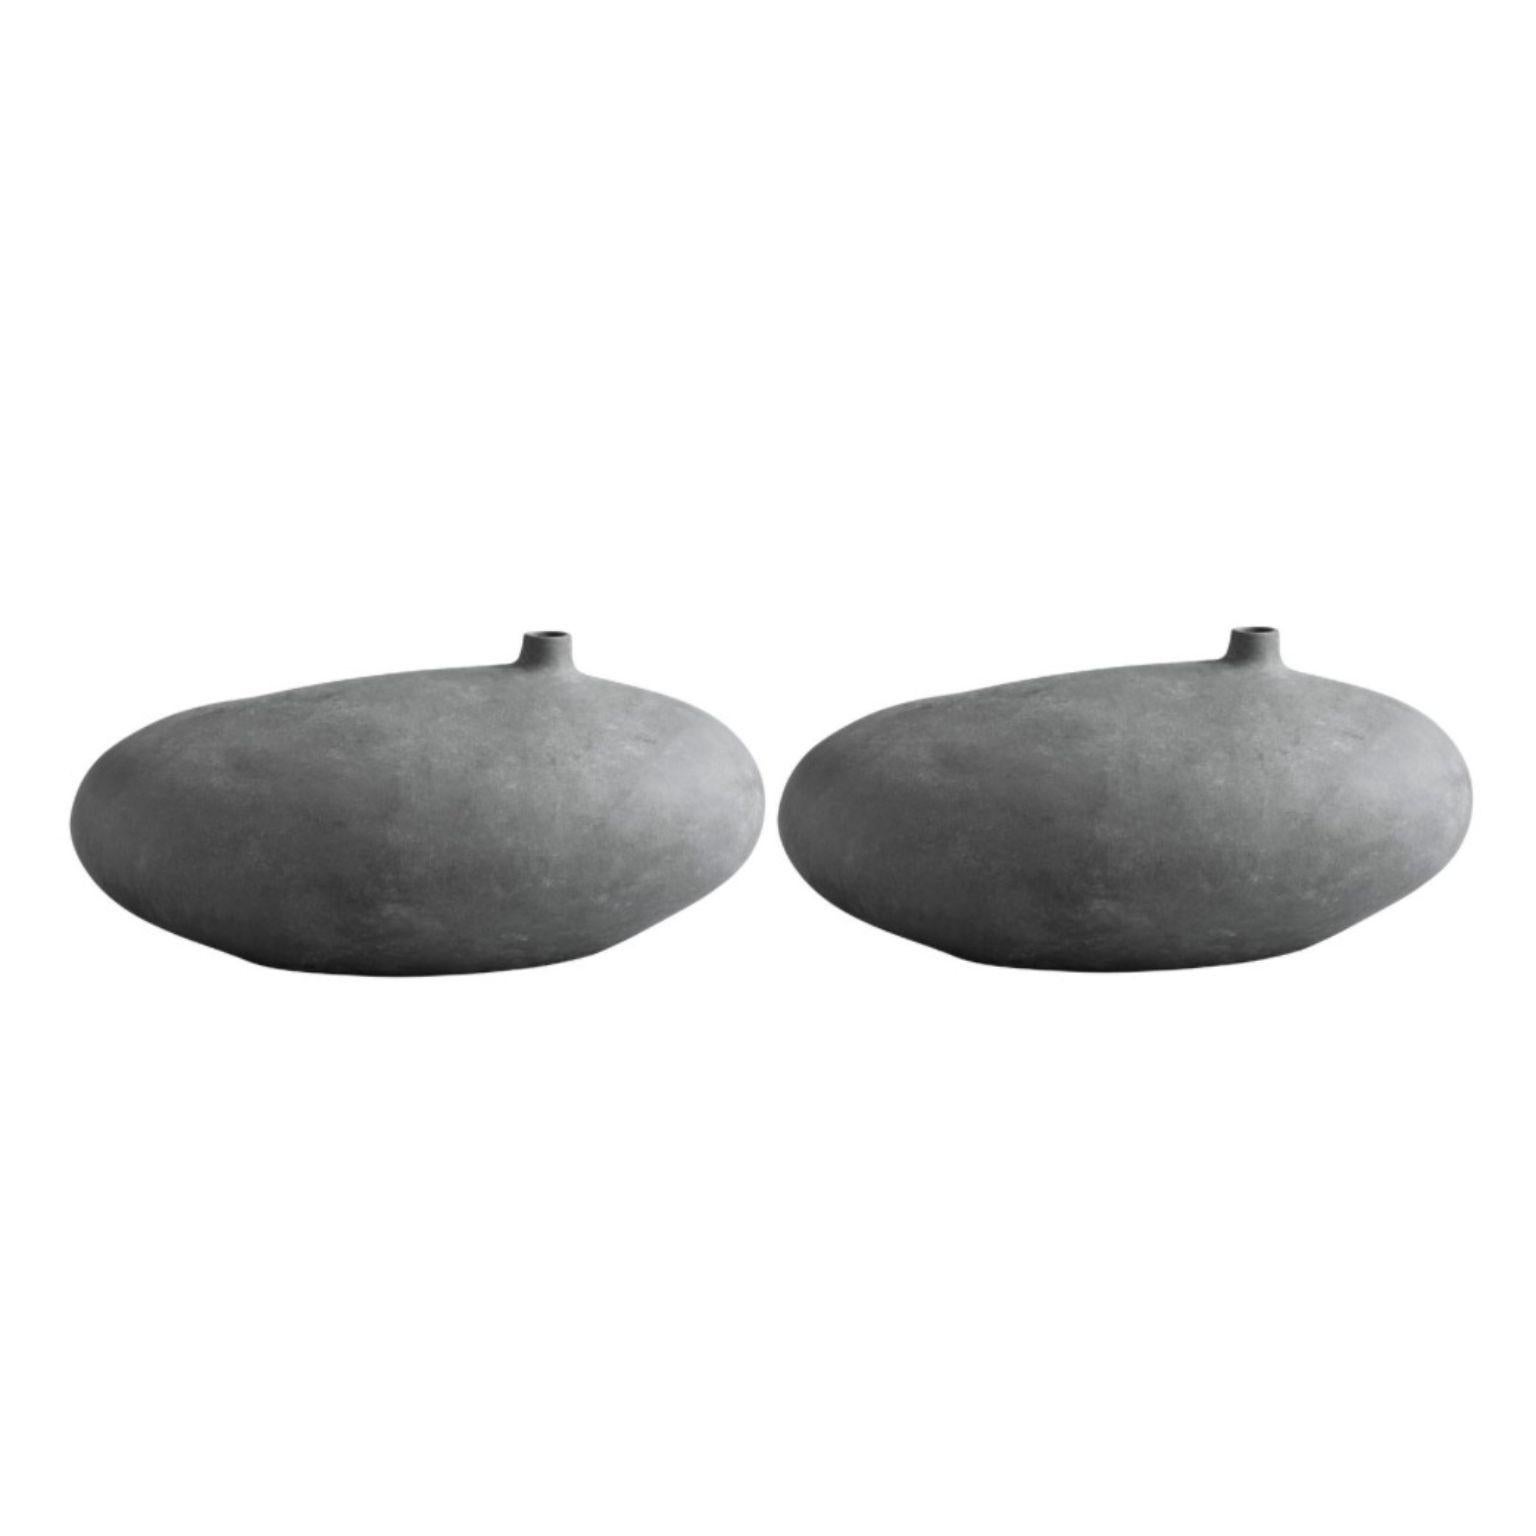 Set of 2 Submarine vases fat by 101 Copenhagen.
Designed by Nicolaj Nøddesbo & Tommy Hyldahl.
Dimensions: L 60 / W 40 / H 22 cm
Materials: ceramic

The Submarines are generously proportioned vases that offers contemporary decorative design in